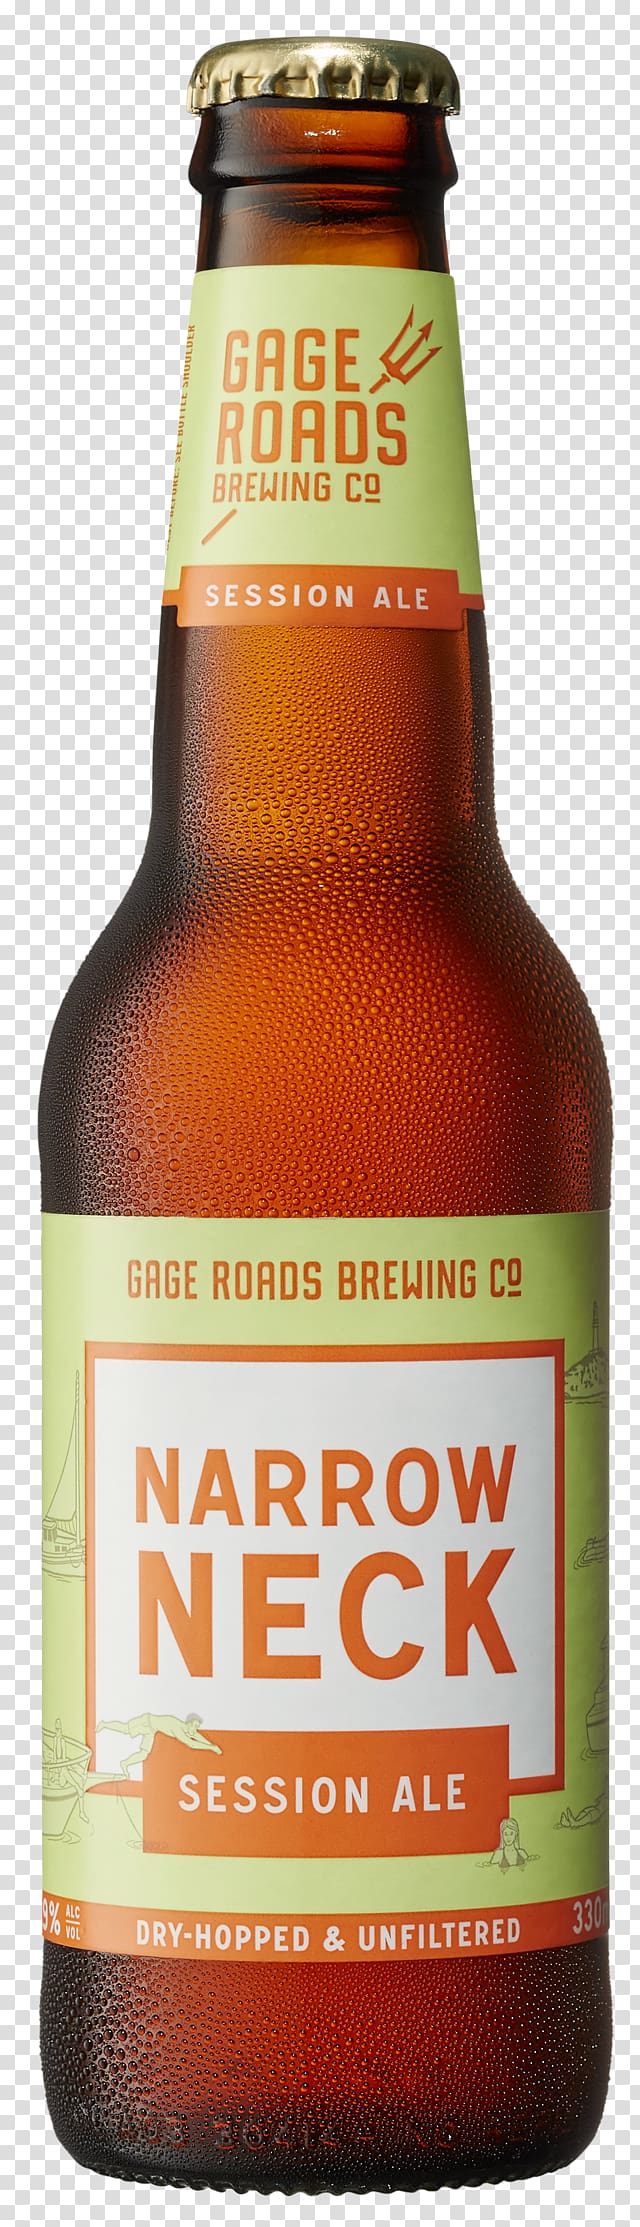 Ale Gage Roads Brewing Company Beer bottle Lager, beer transparent background PNG clipart